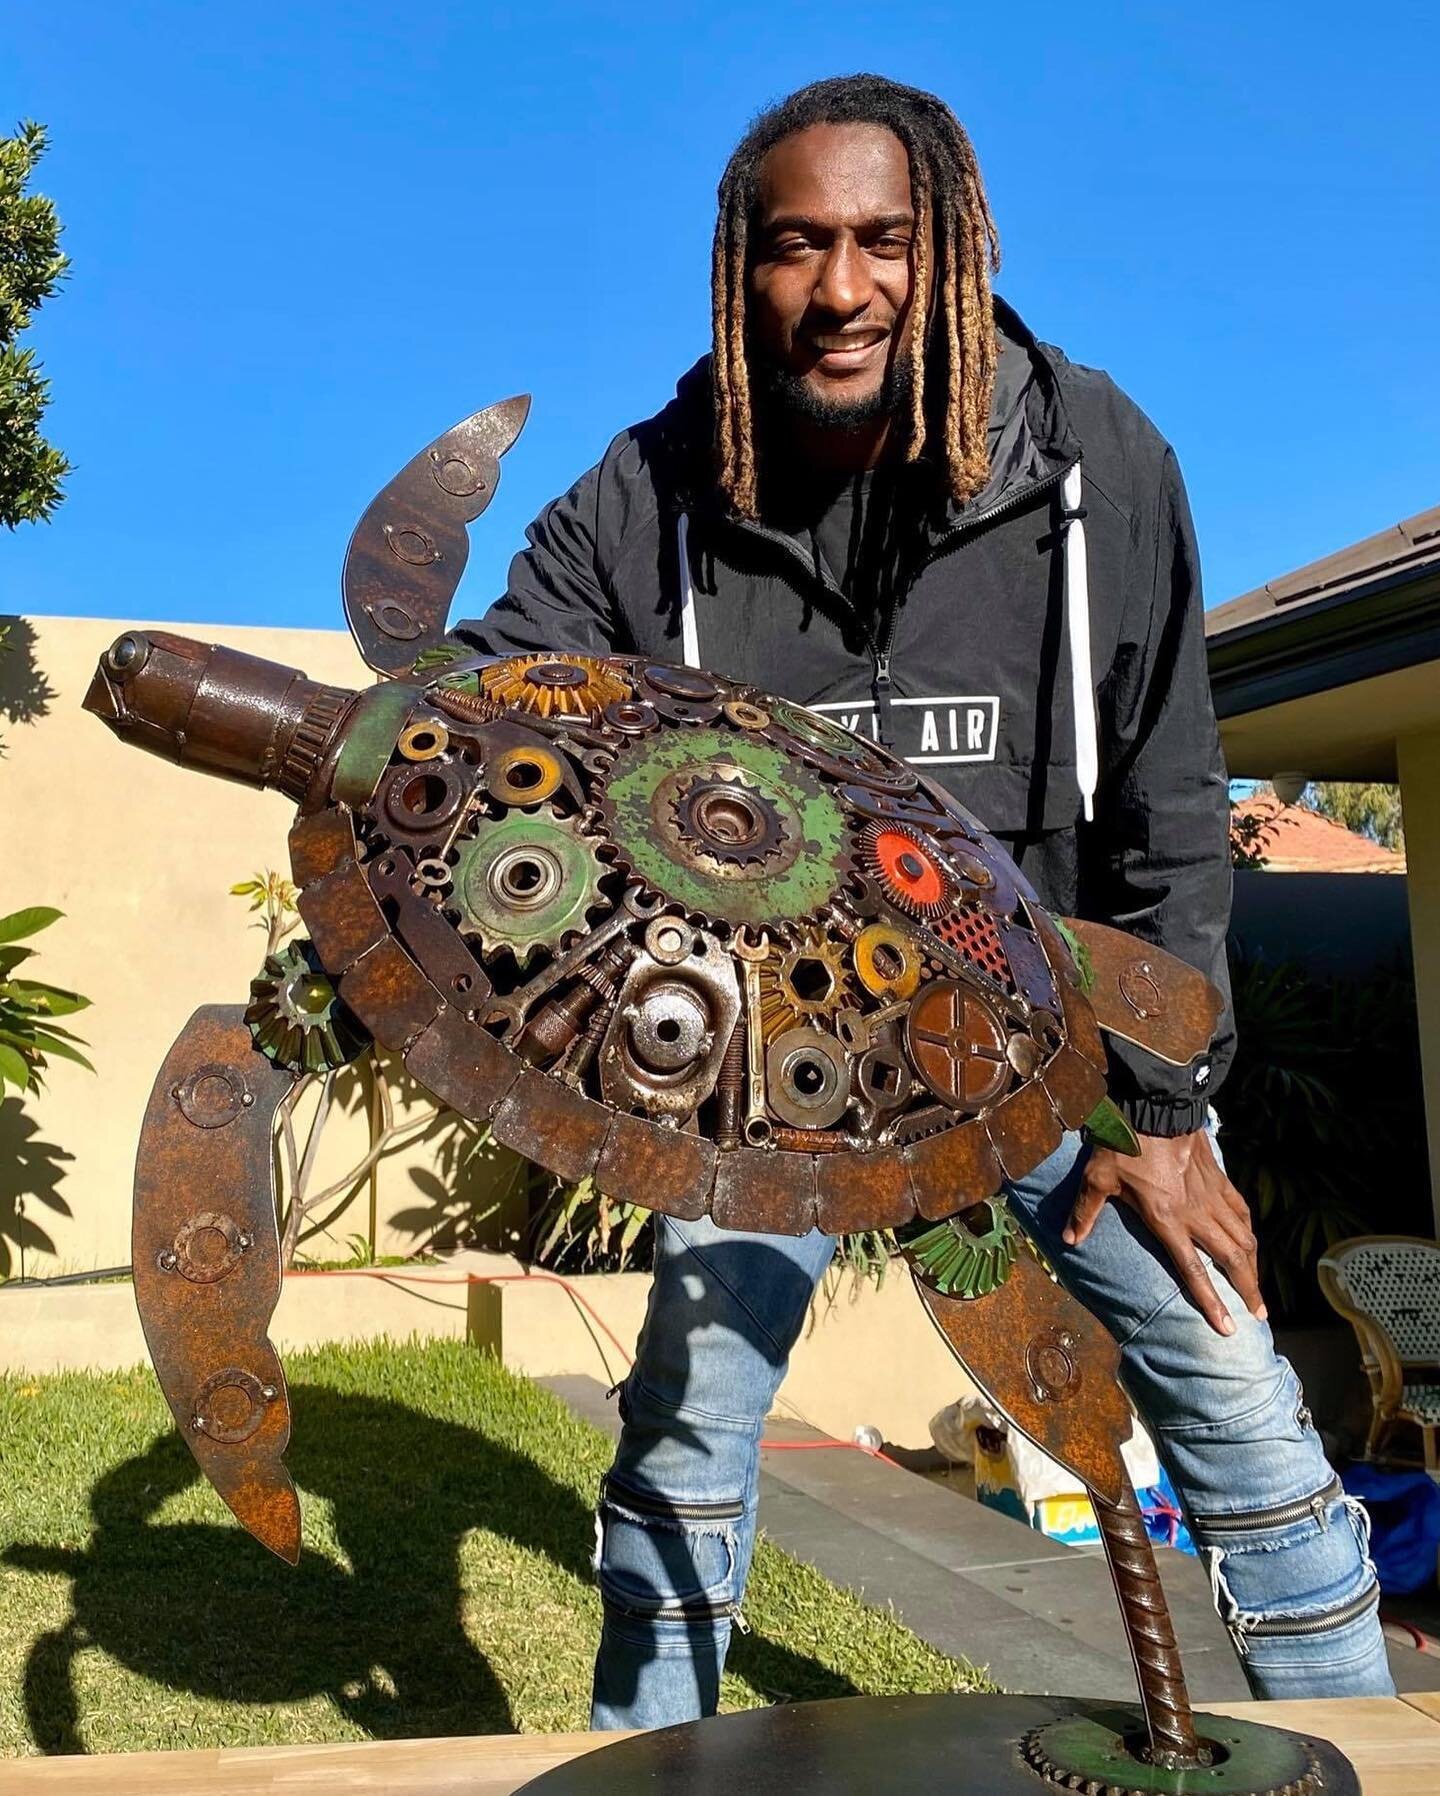 &ldquo;Awesome to have this turtle sculpture in my abode. The turtle is a significant totem in Fijian culture so it will be highly admired and cherished by not only myself and my family here, but those overseas as well. Stoked!!!&rdquo; - Nic Naitanu